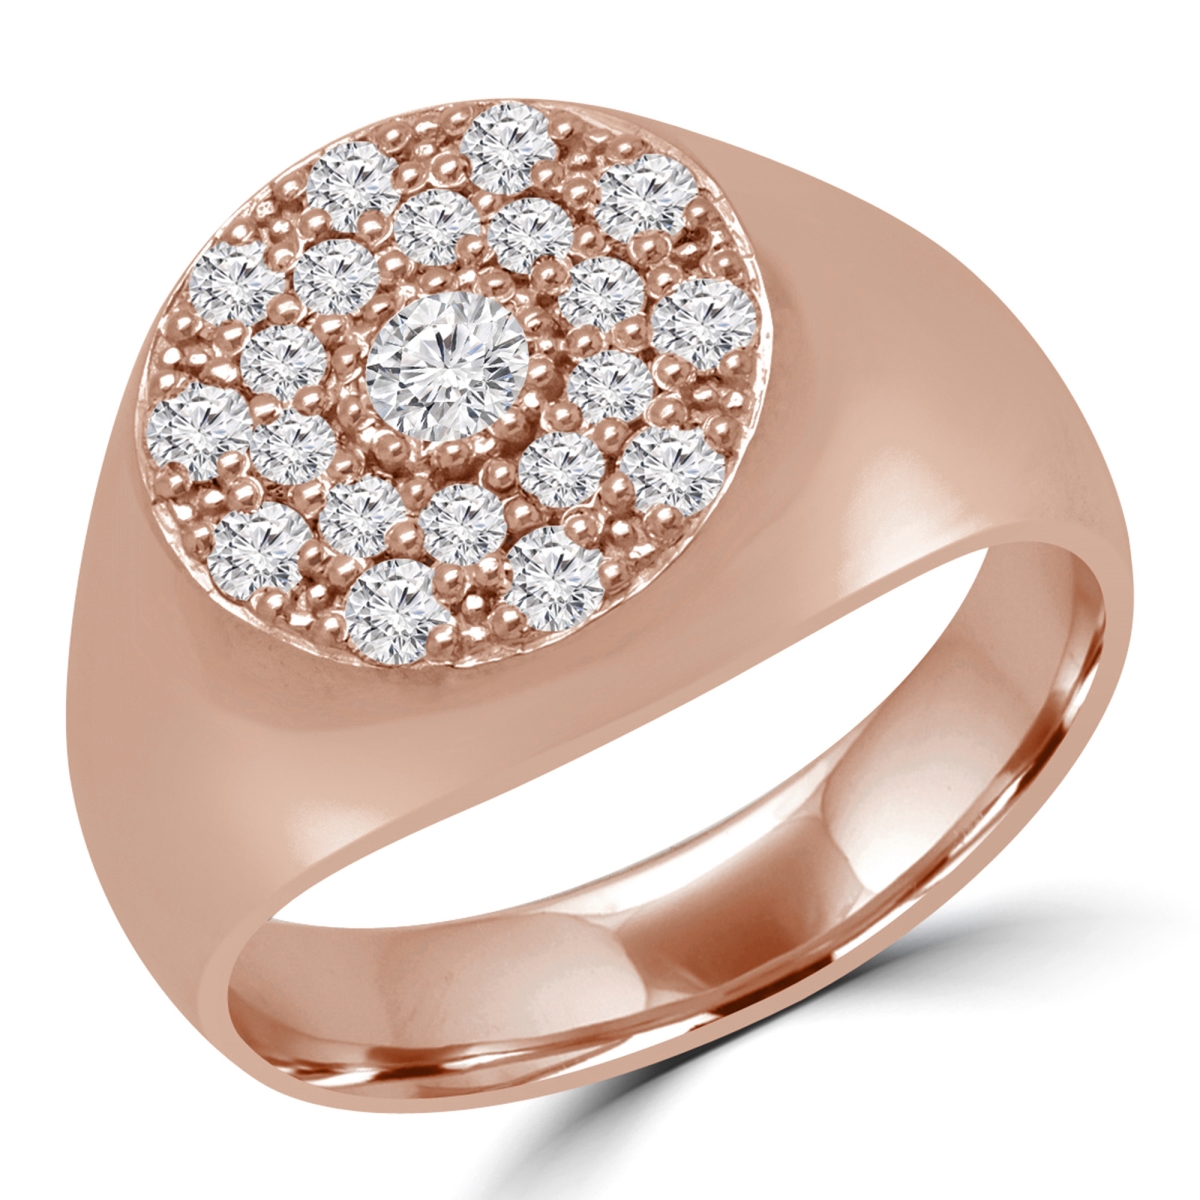 MD180497-8.75 0.4 CTW Round Diamond Pinky Cluster Cocktail Ring in 14K Rose Gold - Size 8.75